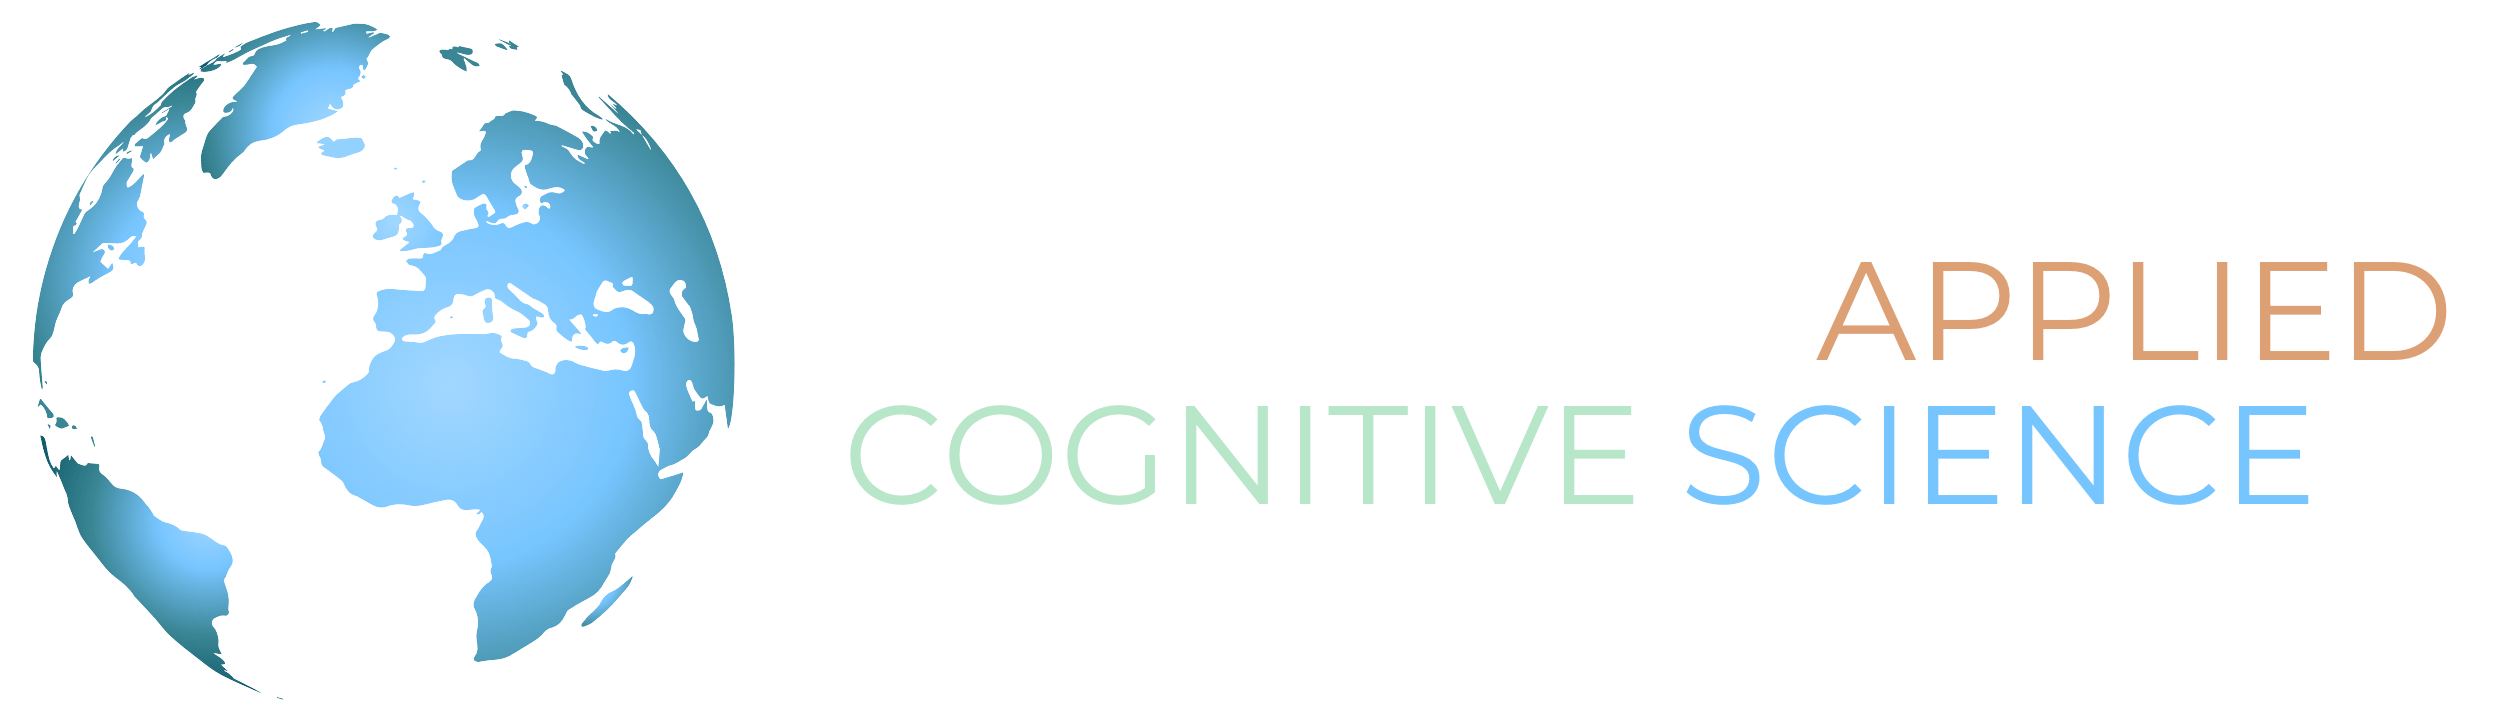 Center for Applied Cognitive Science